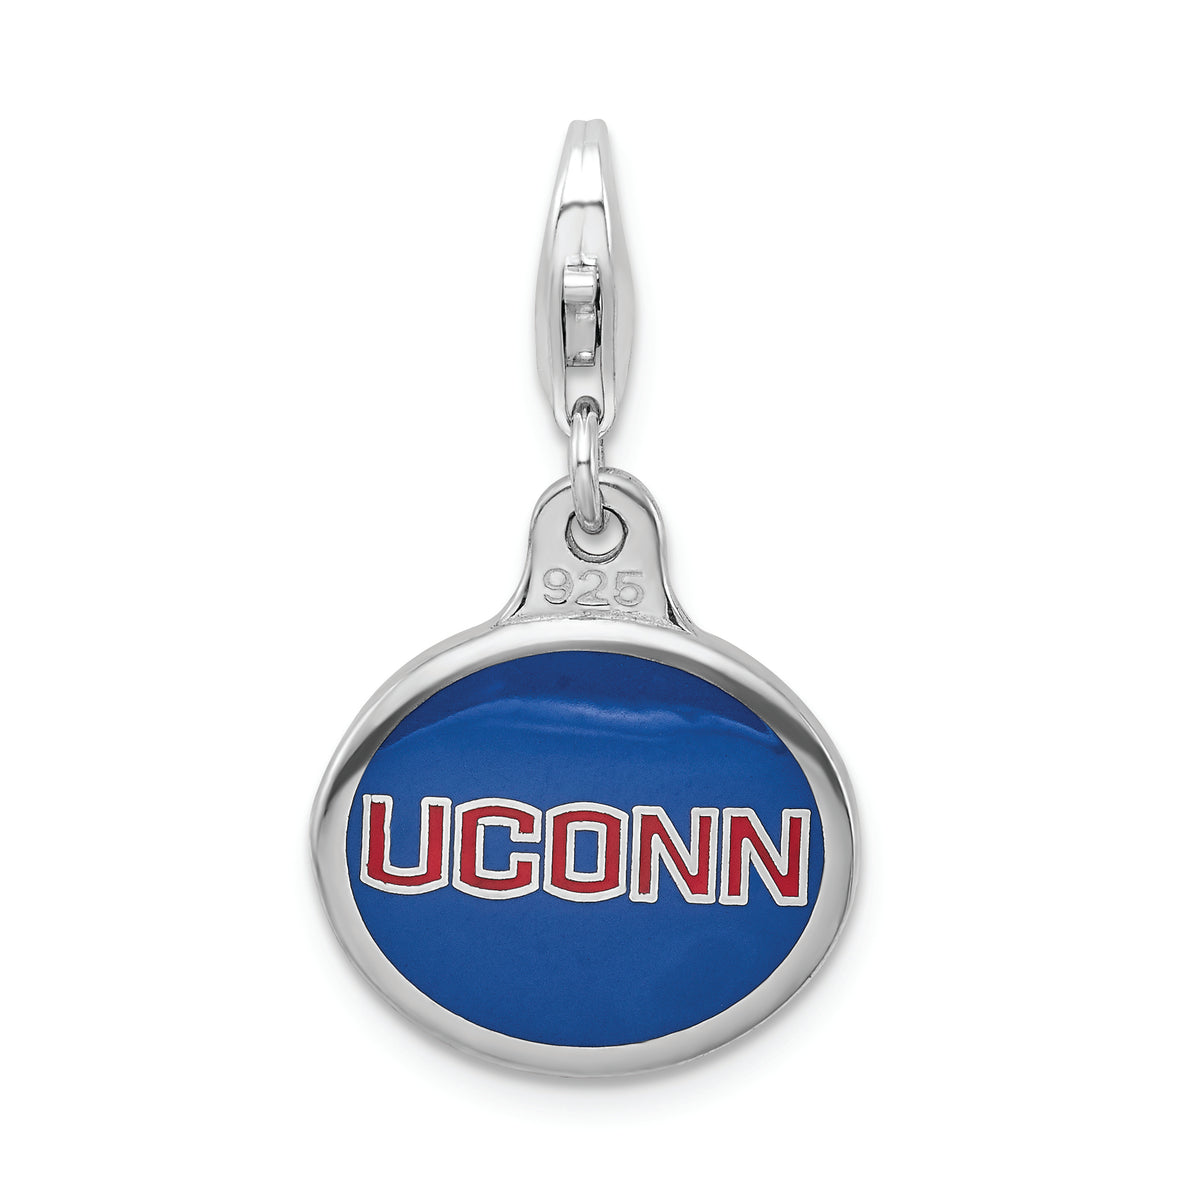 Amore La Vita Sterling Silver Rhodium-plated Polished Enameled University of Connecticut Charm with Fancy Lobster Clasp